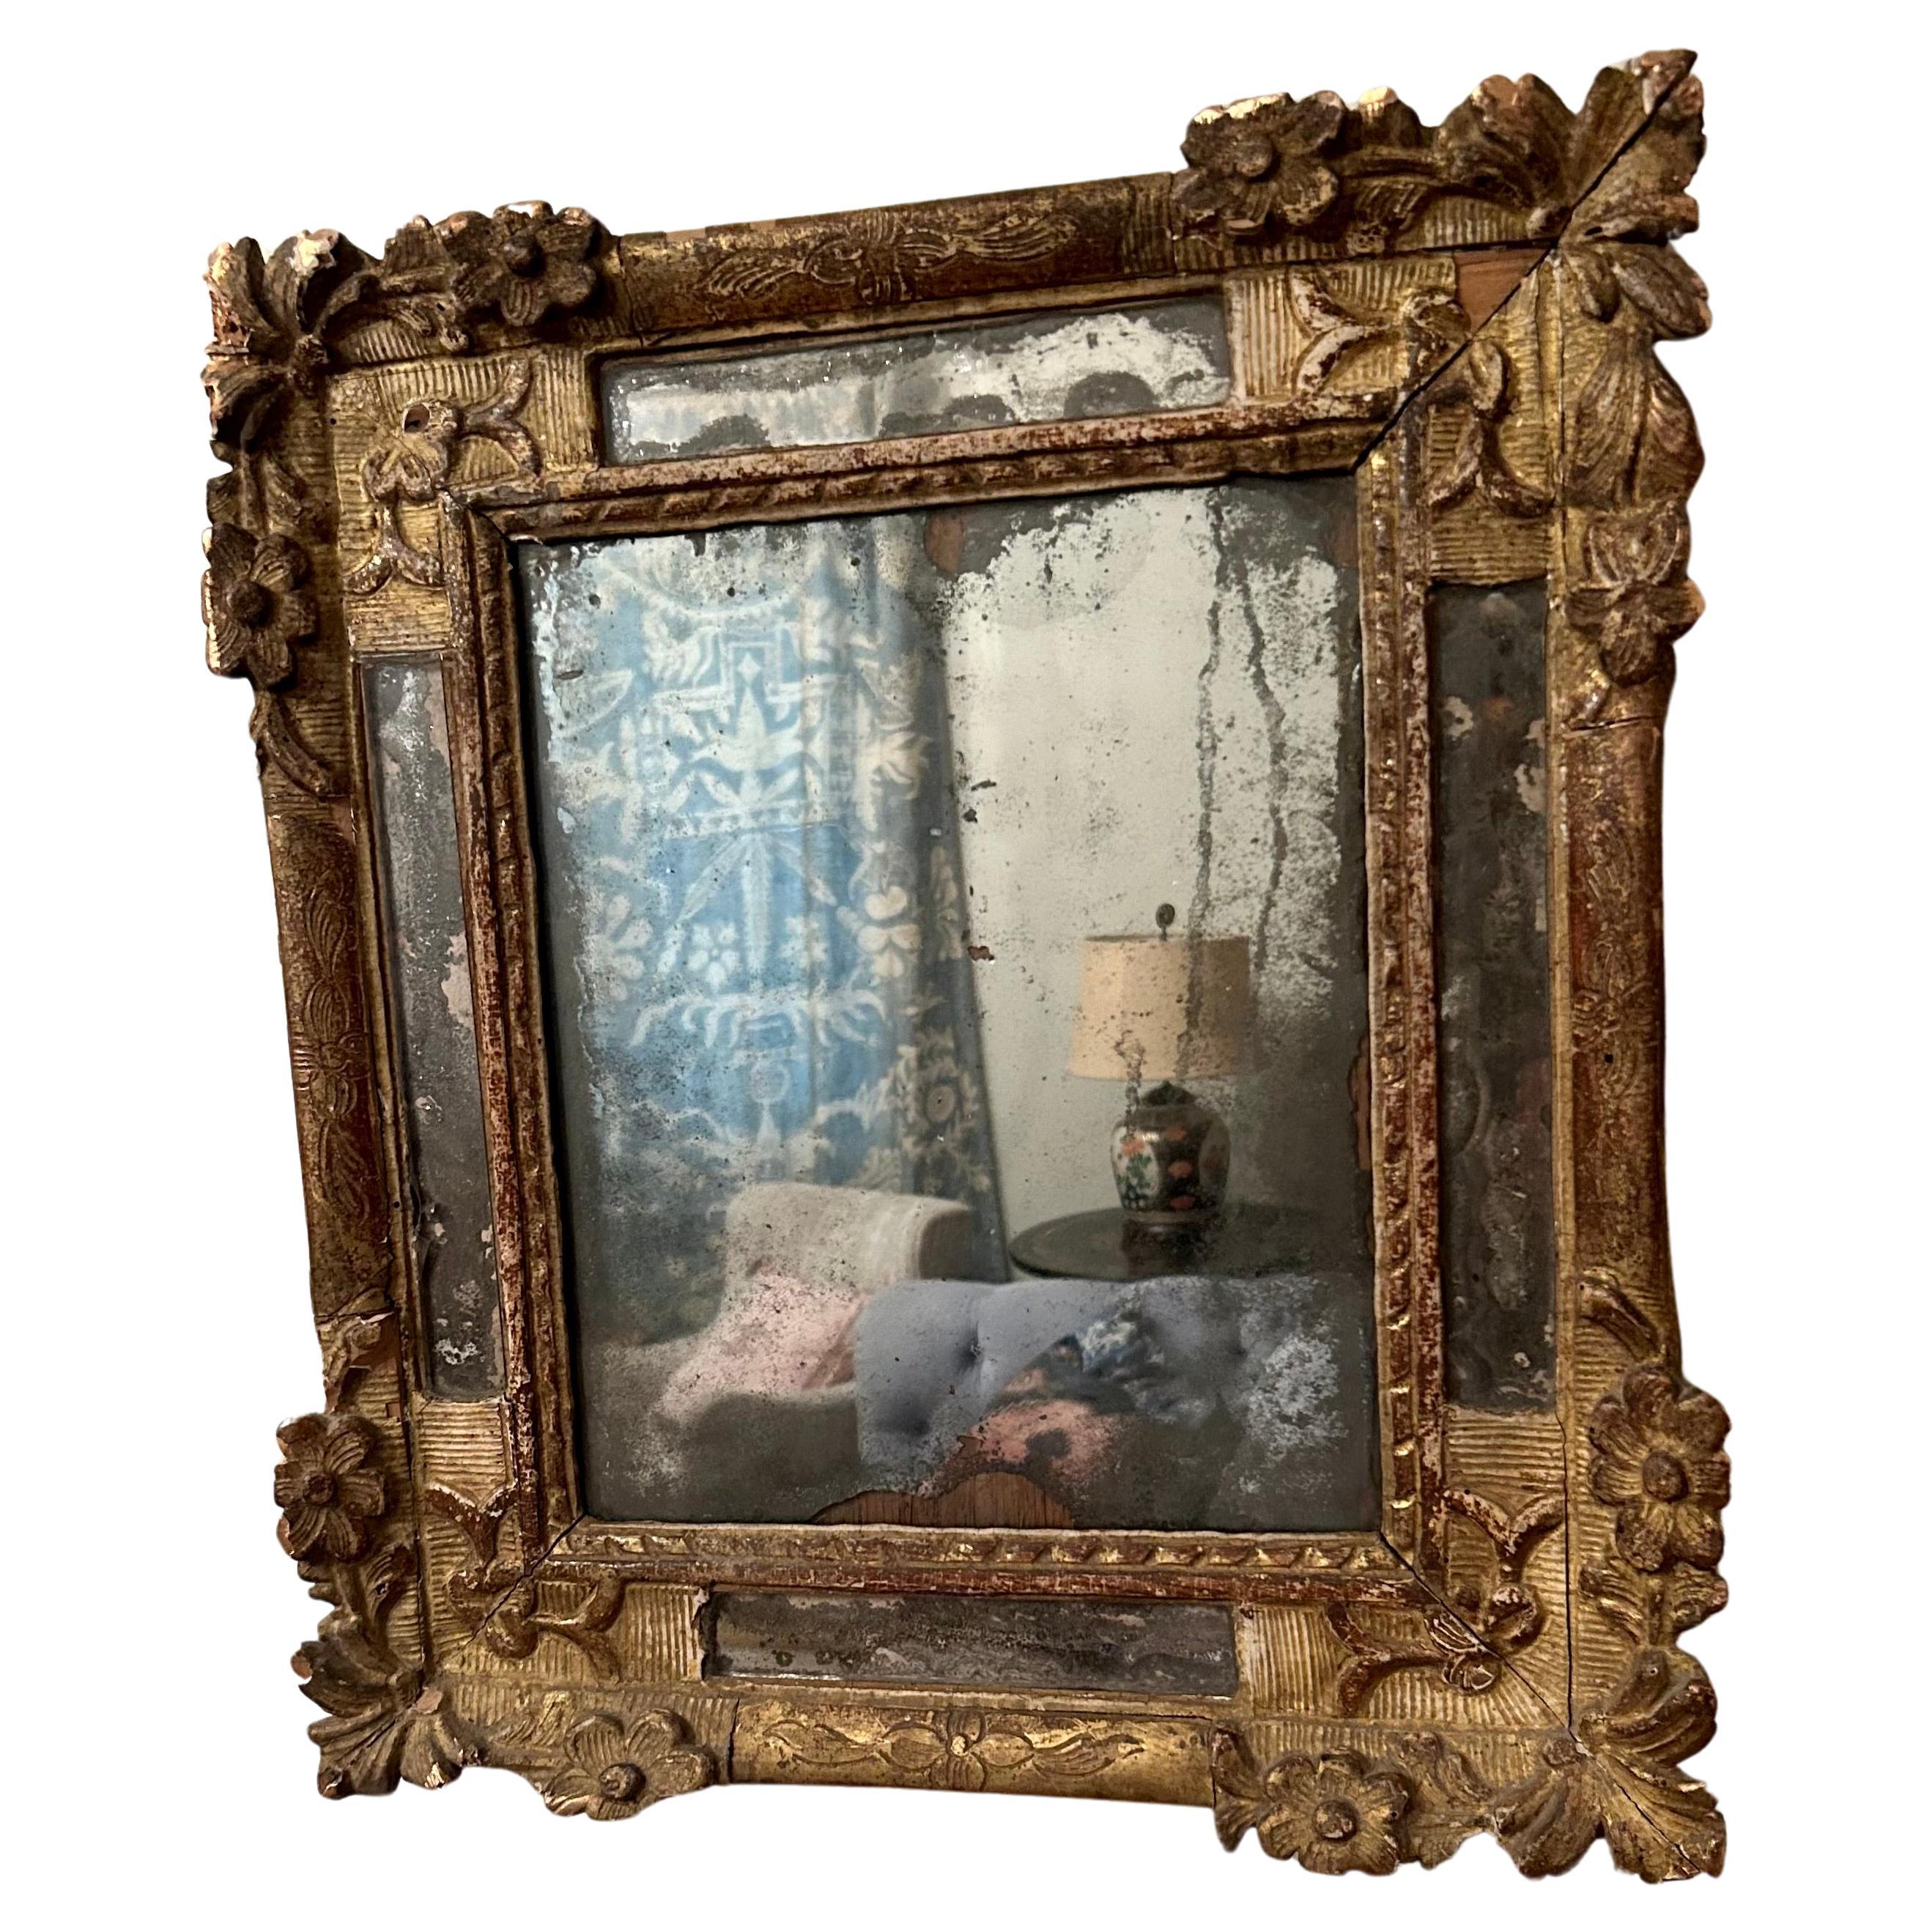 A rare and exquisite Régence small French parclose mirror, circa 1725. This piece has retained all of its mercury glass and has a beautiful patina. A true historical piece. 
Cracks and small losses throughout. Some edges of the frame have been